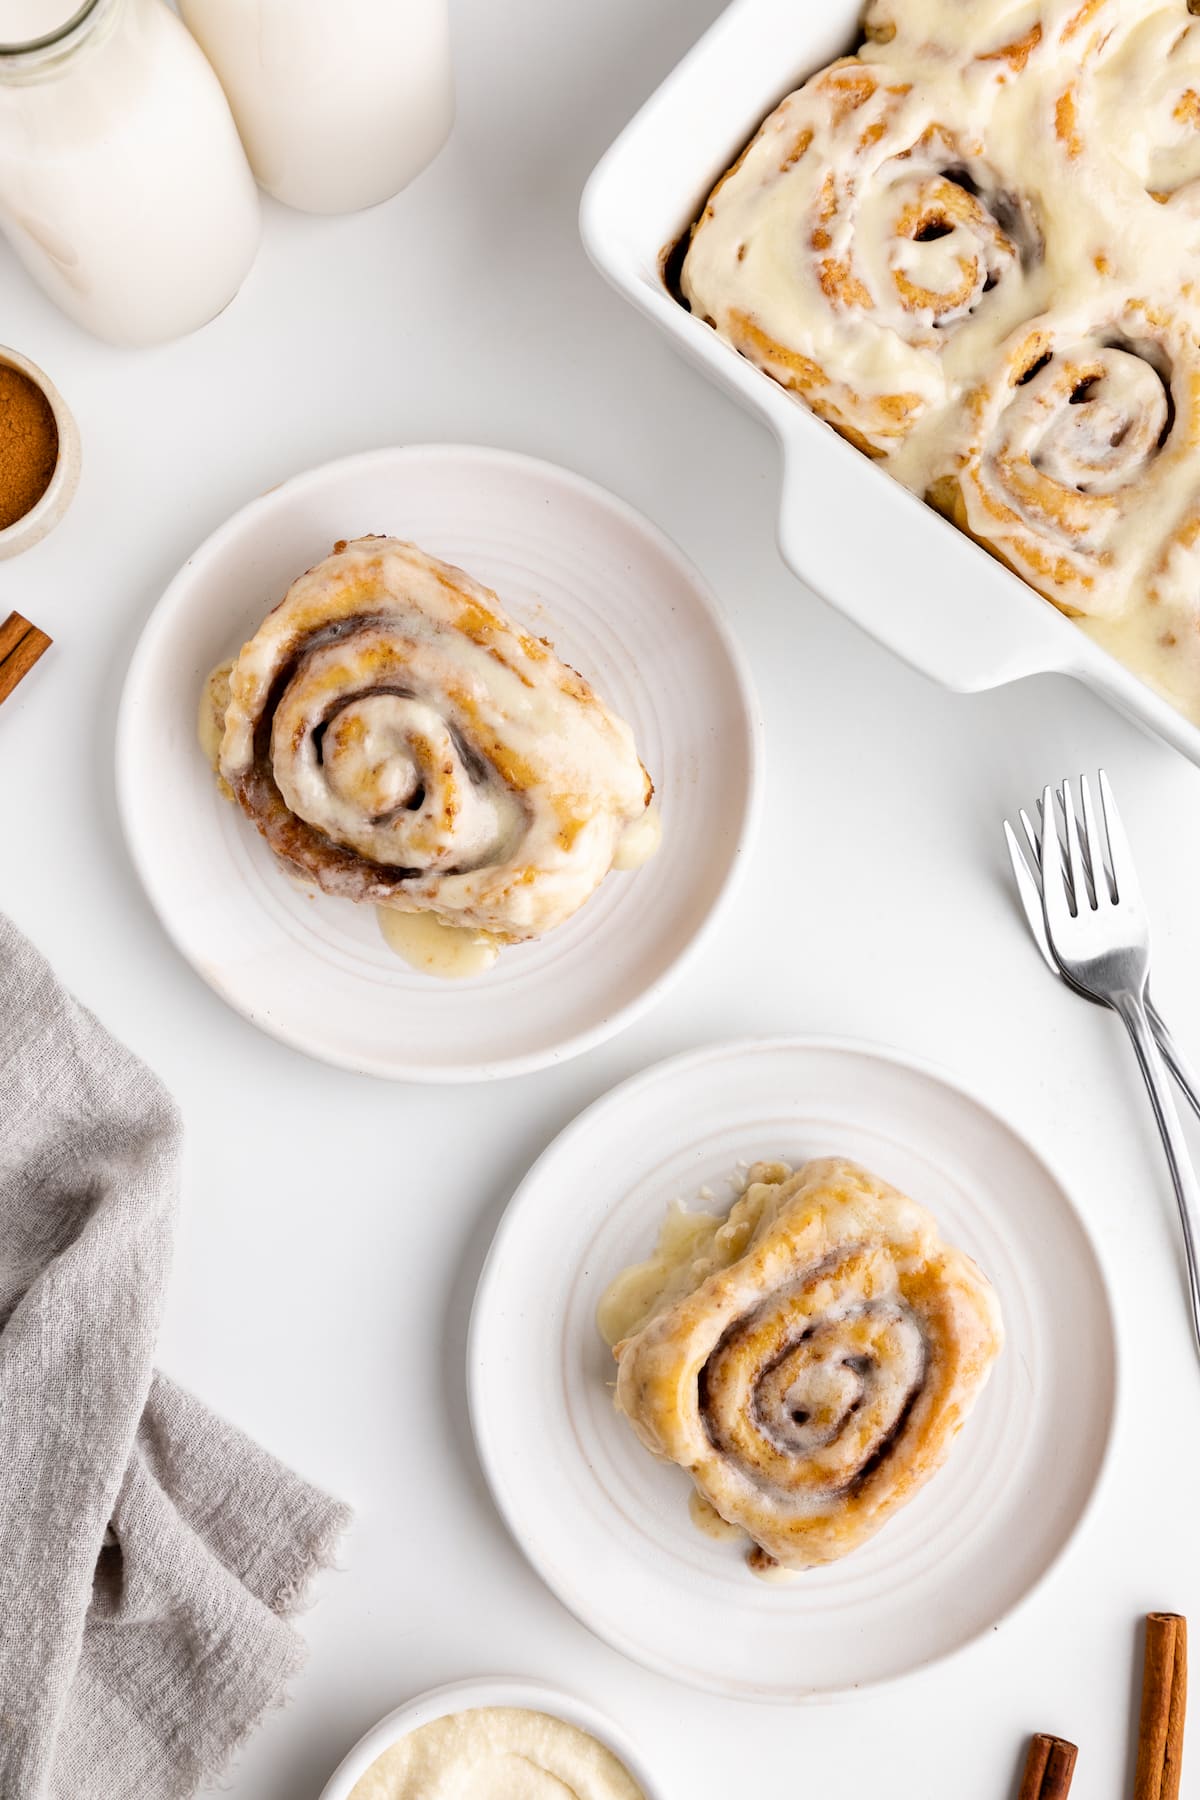 Two vegan cinnamon rolls on plates, covered in frosting.